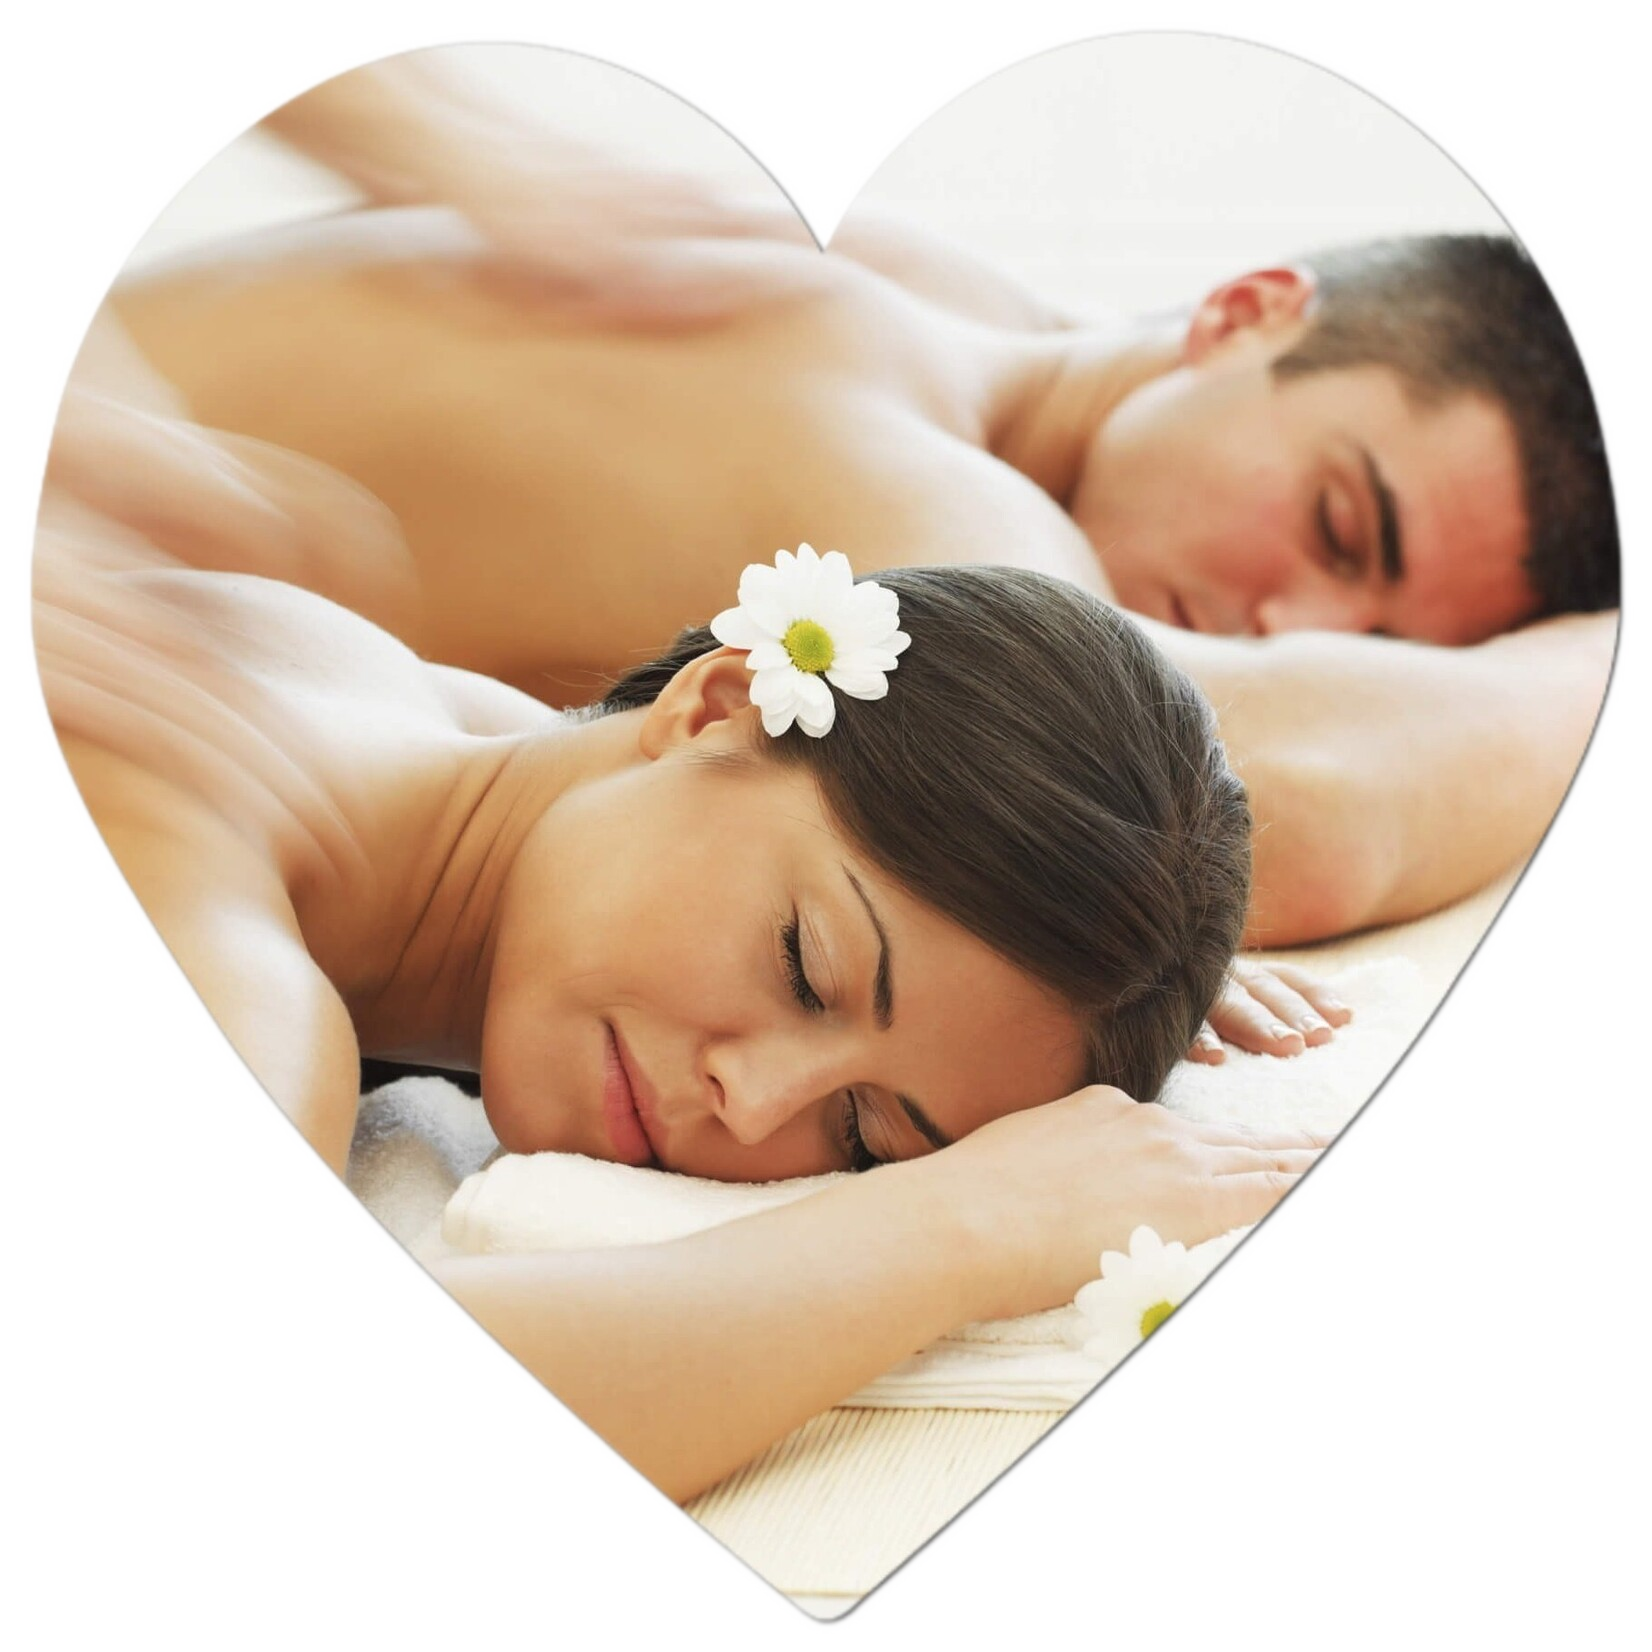 Couples Massage at Tulsa best, the most Relaxing Chinese Massage, real AMP